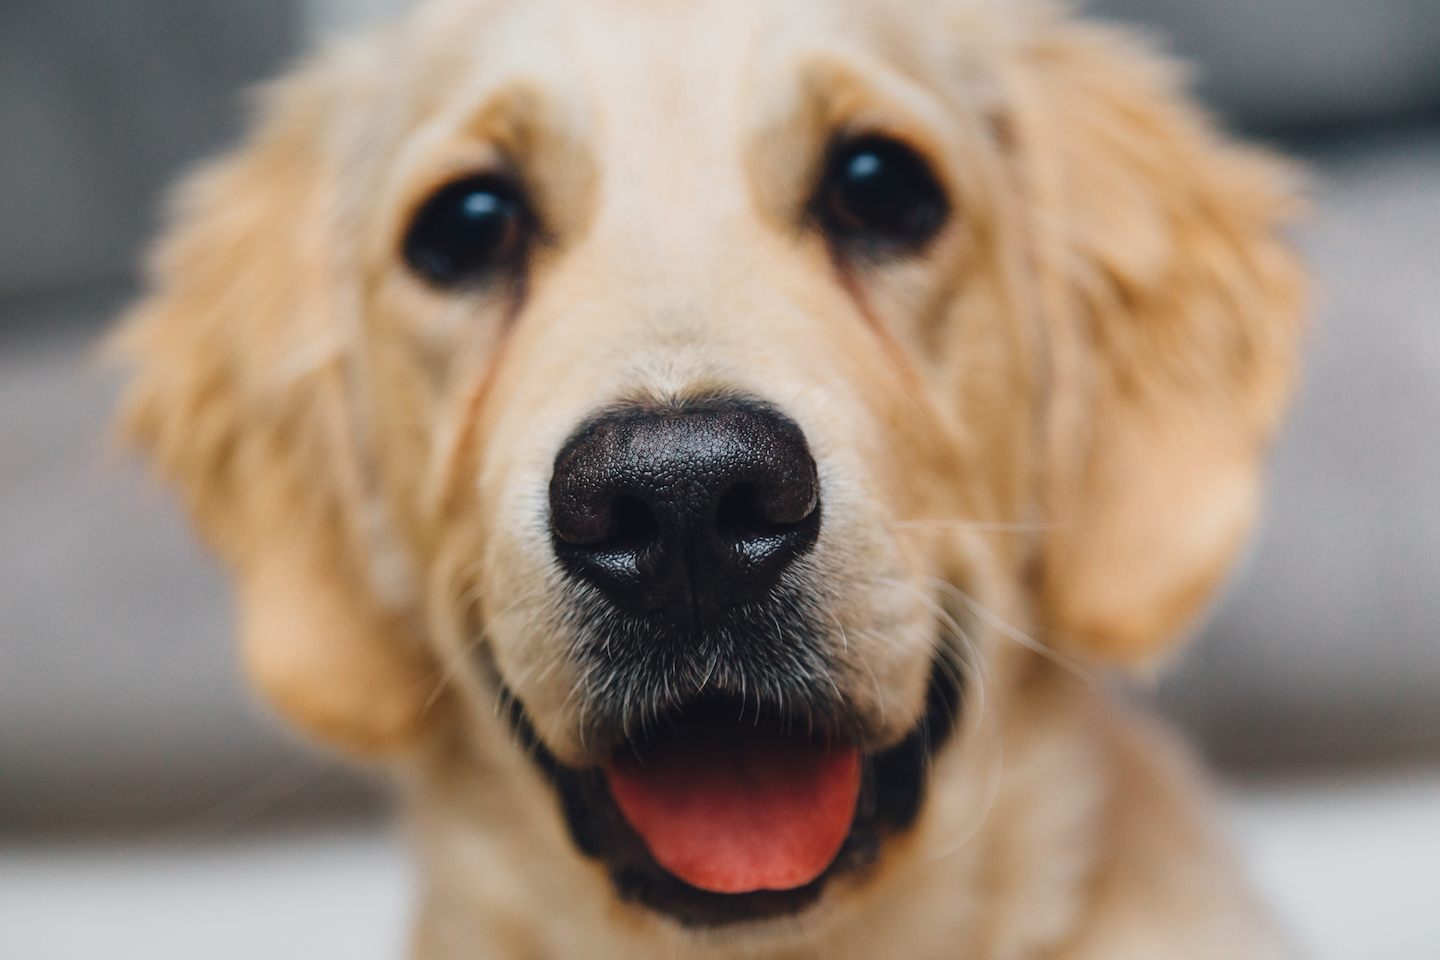 Dogs can PERFECTLY detect cancer by sniffing bandages … works better than lab equipment